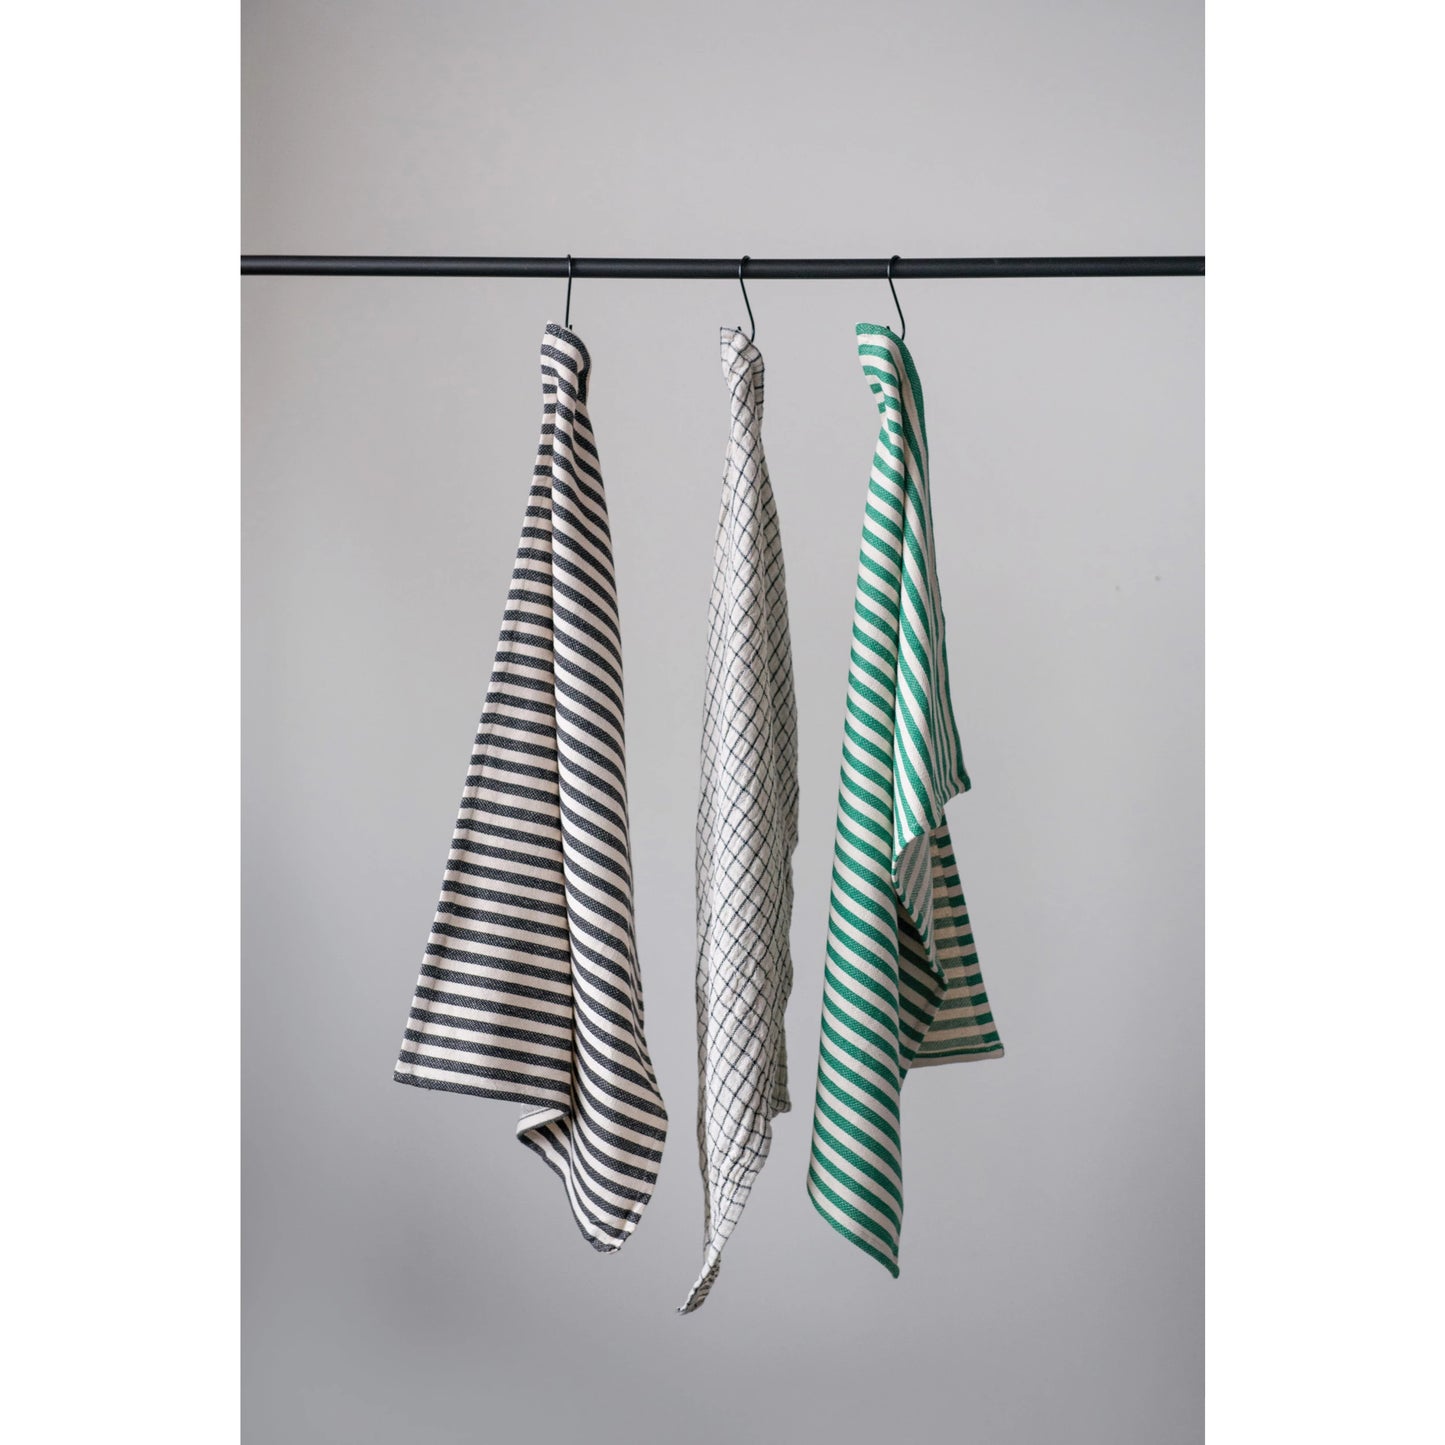 three different patterned cotton tea towels hanging against a light gray background